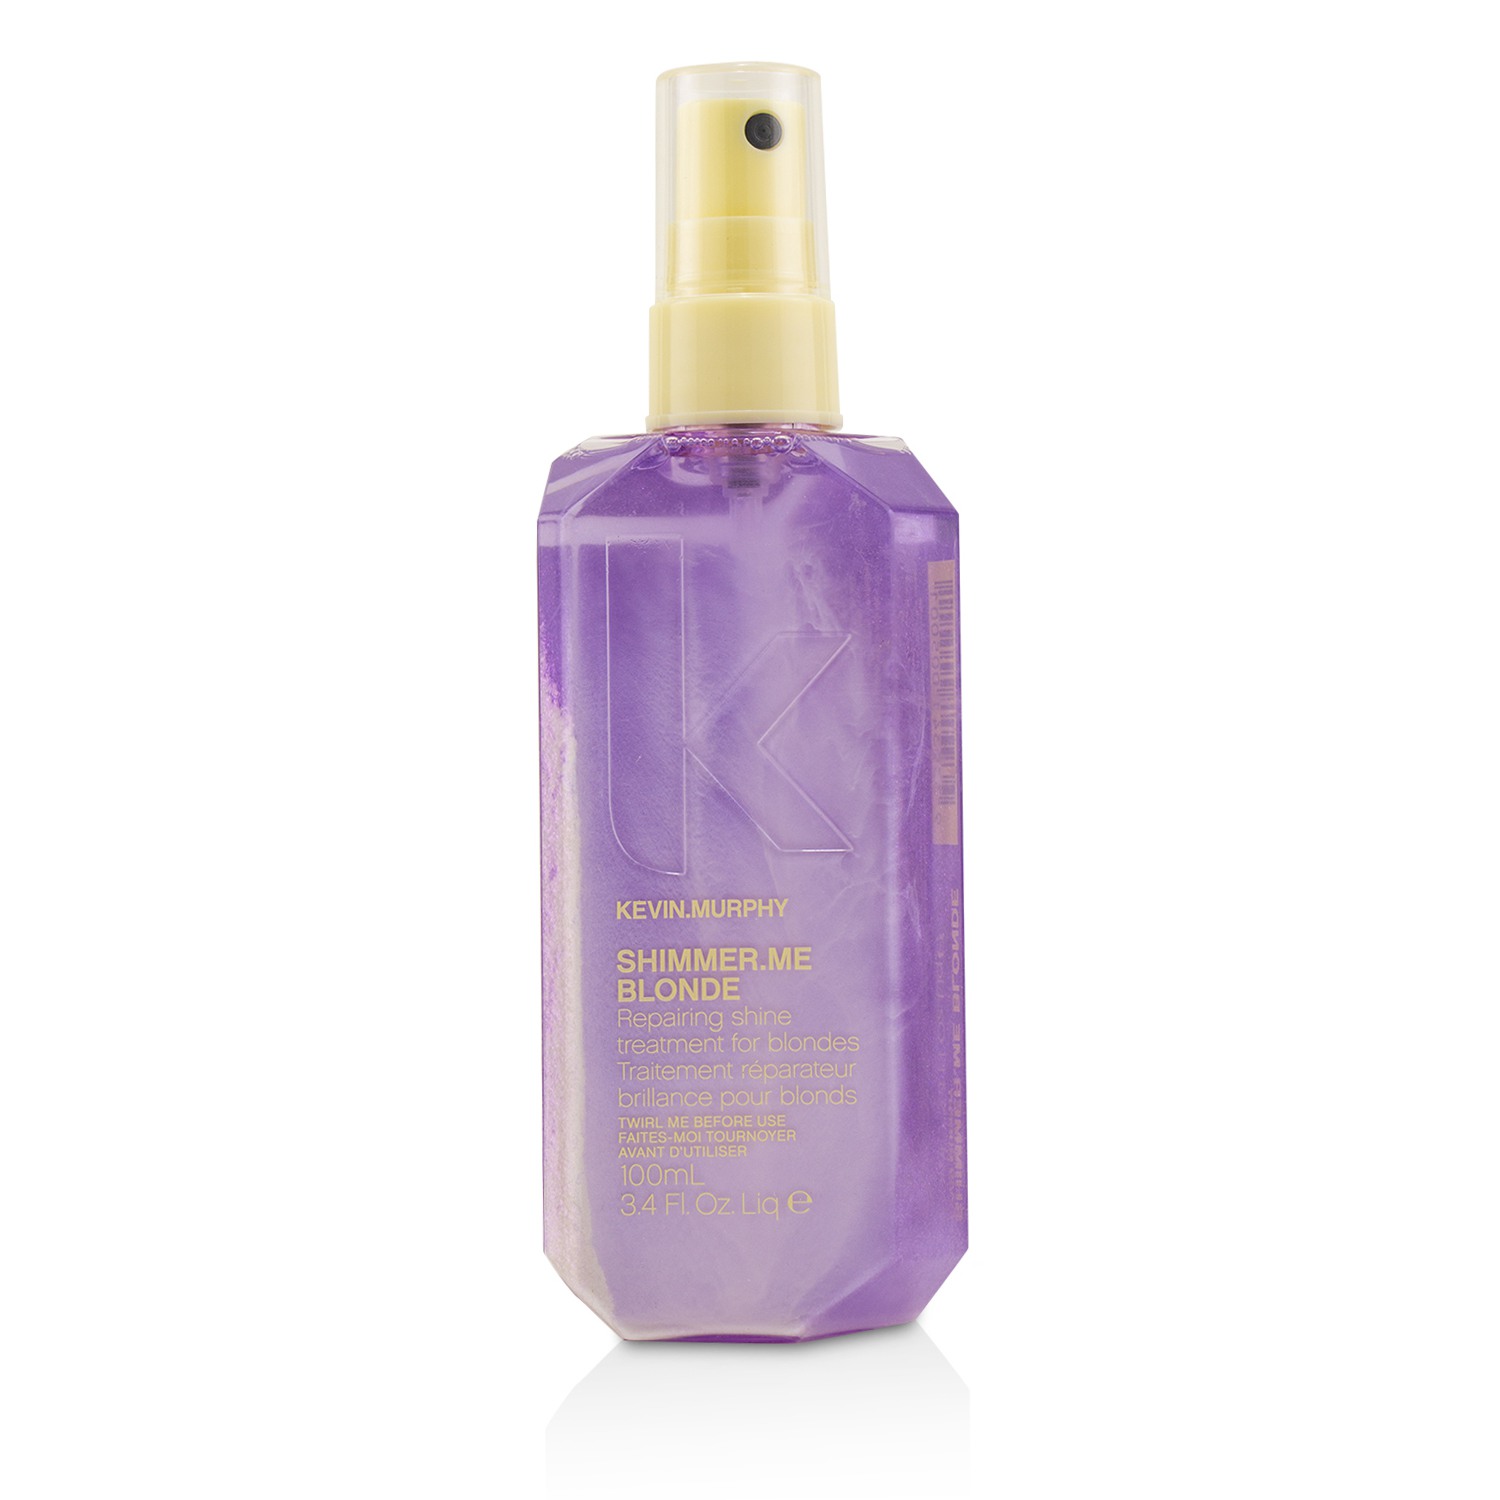 Shimmer.Me Blonde (Repairing Shine Treatment - For Blondes) Kevin.Murphy Image